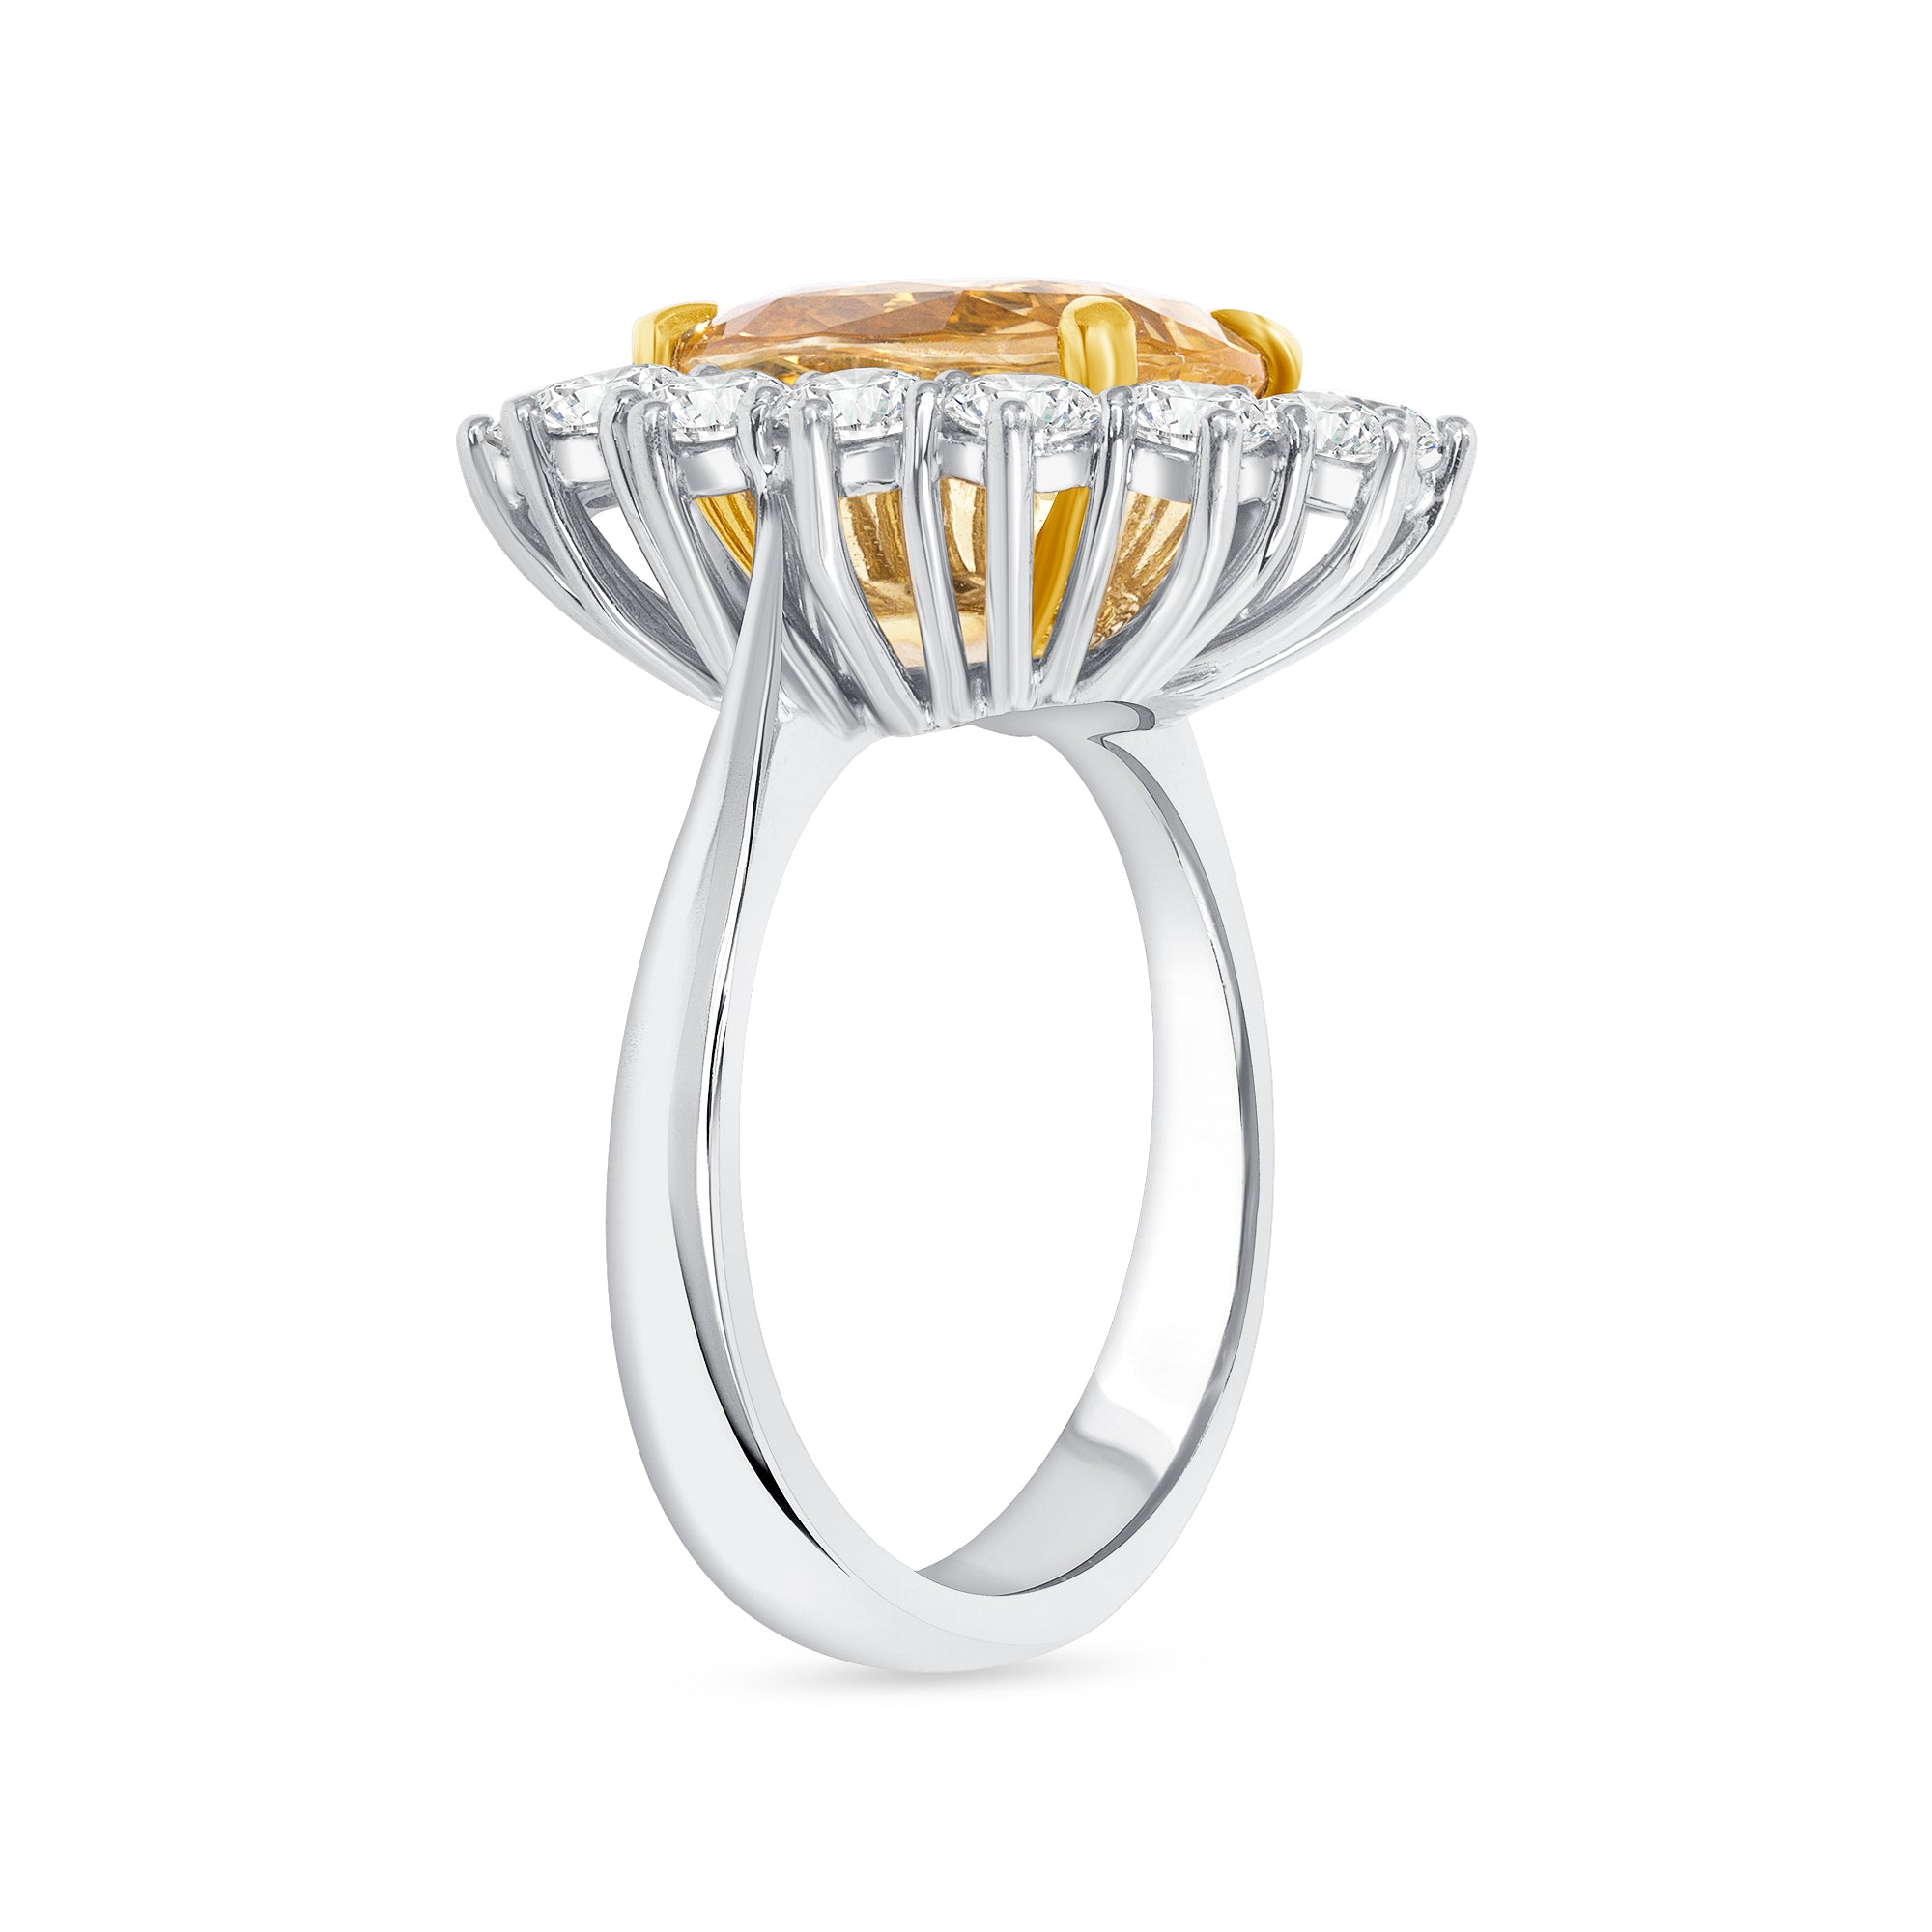 7.86 CT. Oval Yellow Sapphire and Round Brilliant Diamond Ring in Platinum